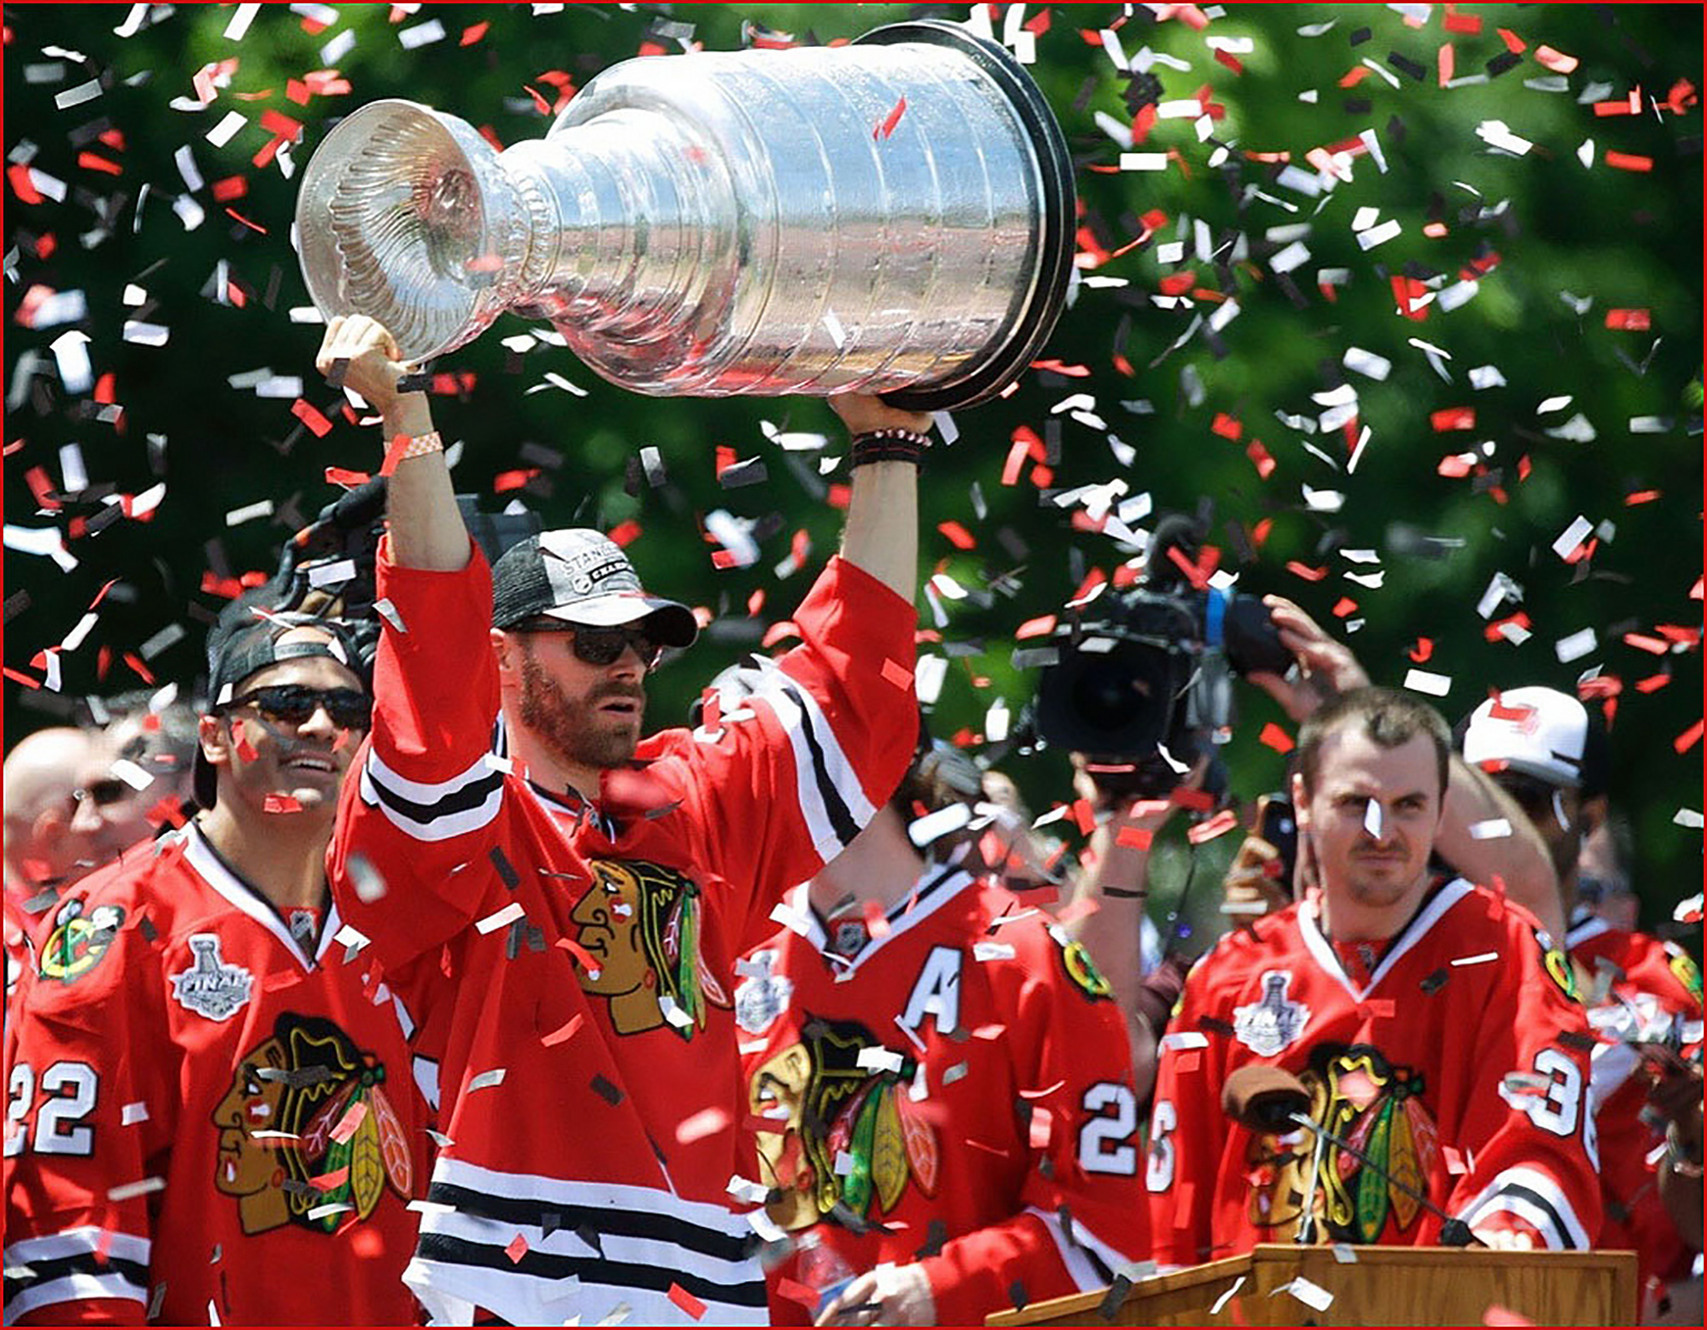 How to make your own Stanley Cup - NCClinked